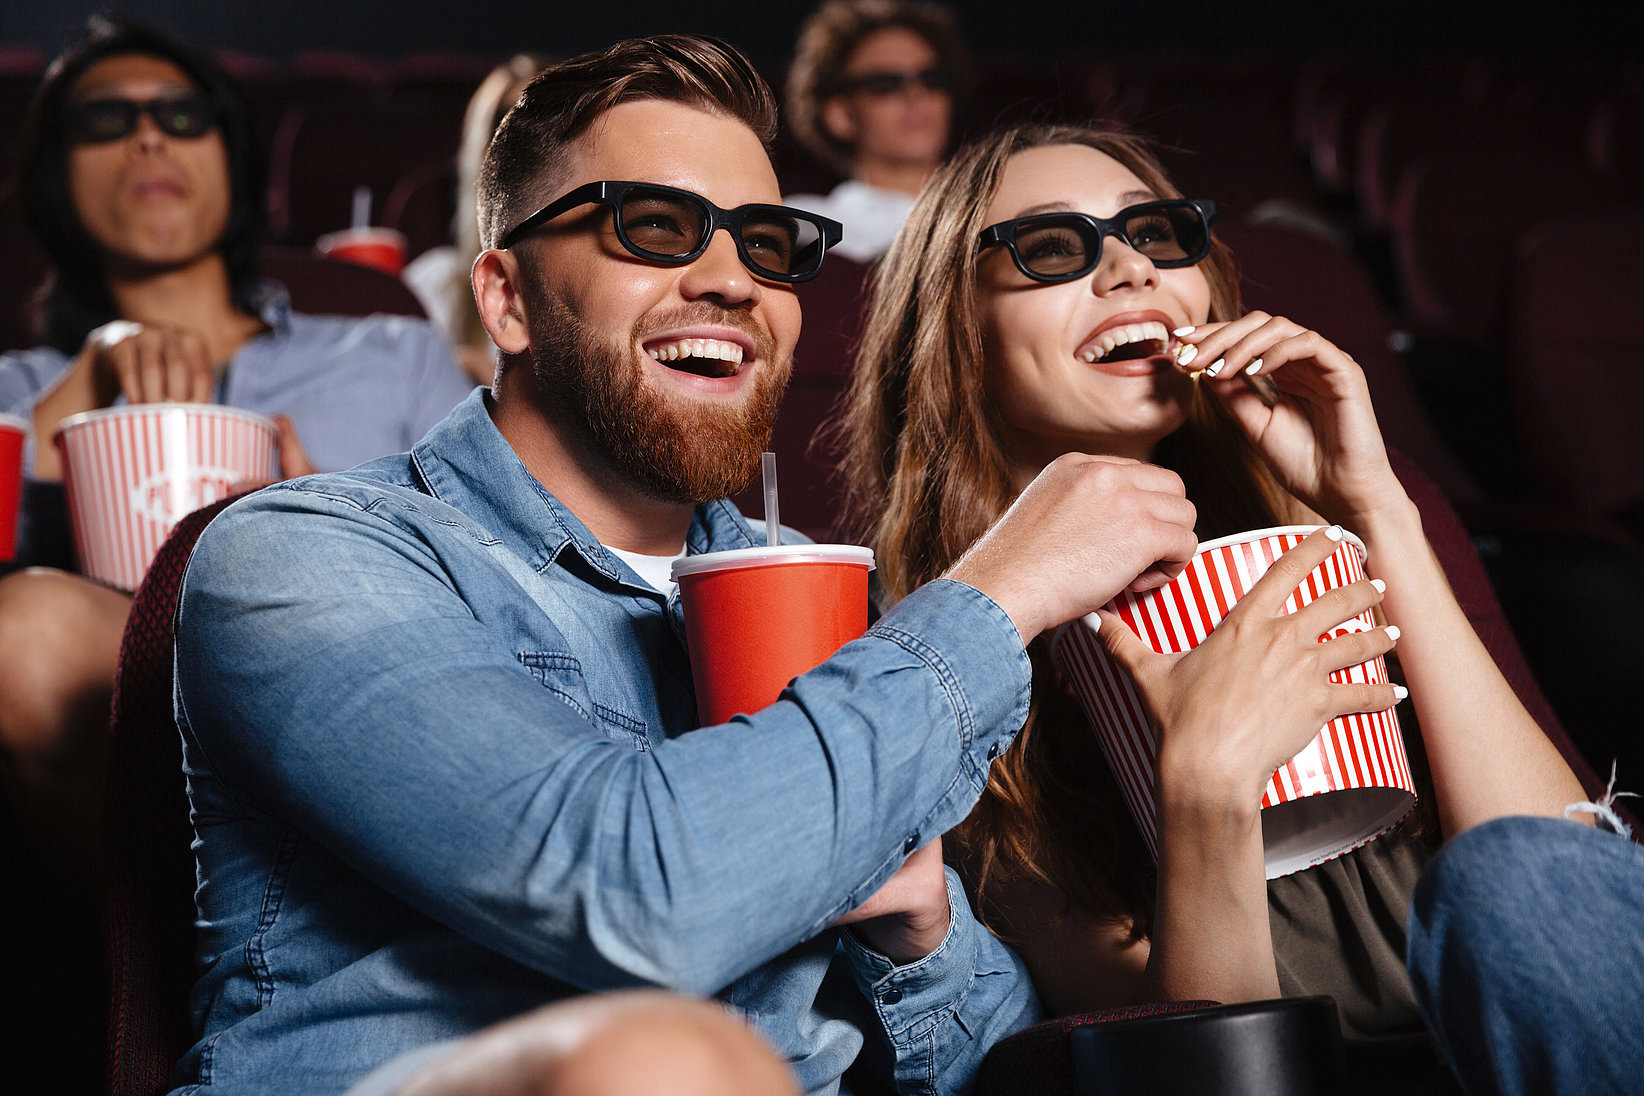 A woman and a man sit smiling in a cinema, watching a movie with 3D glasses and eating popcorn.